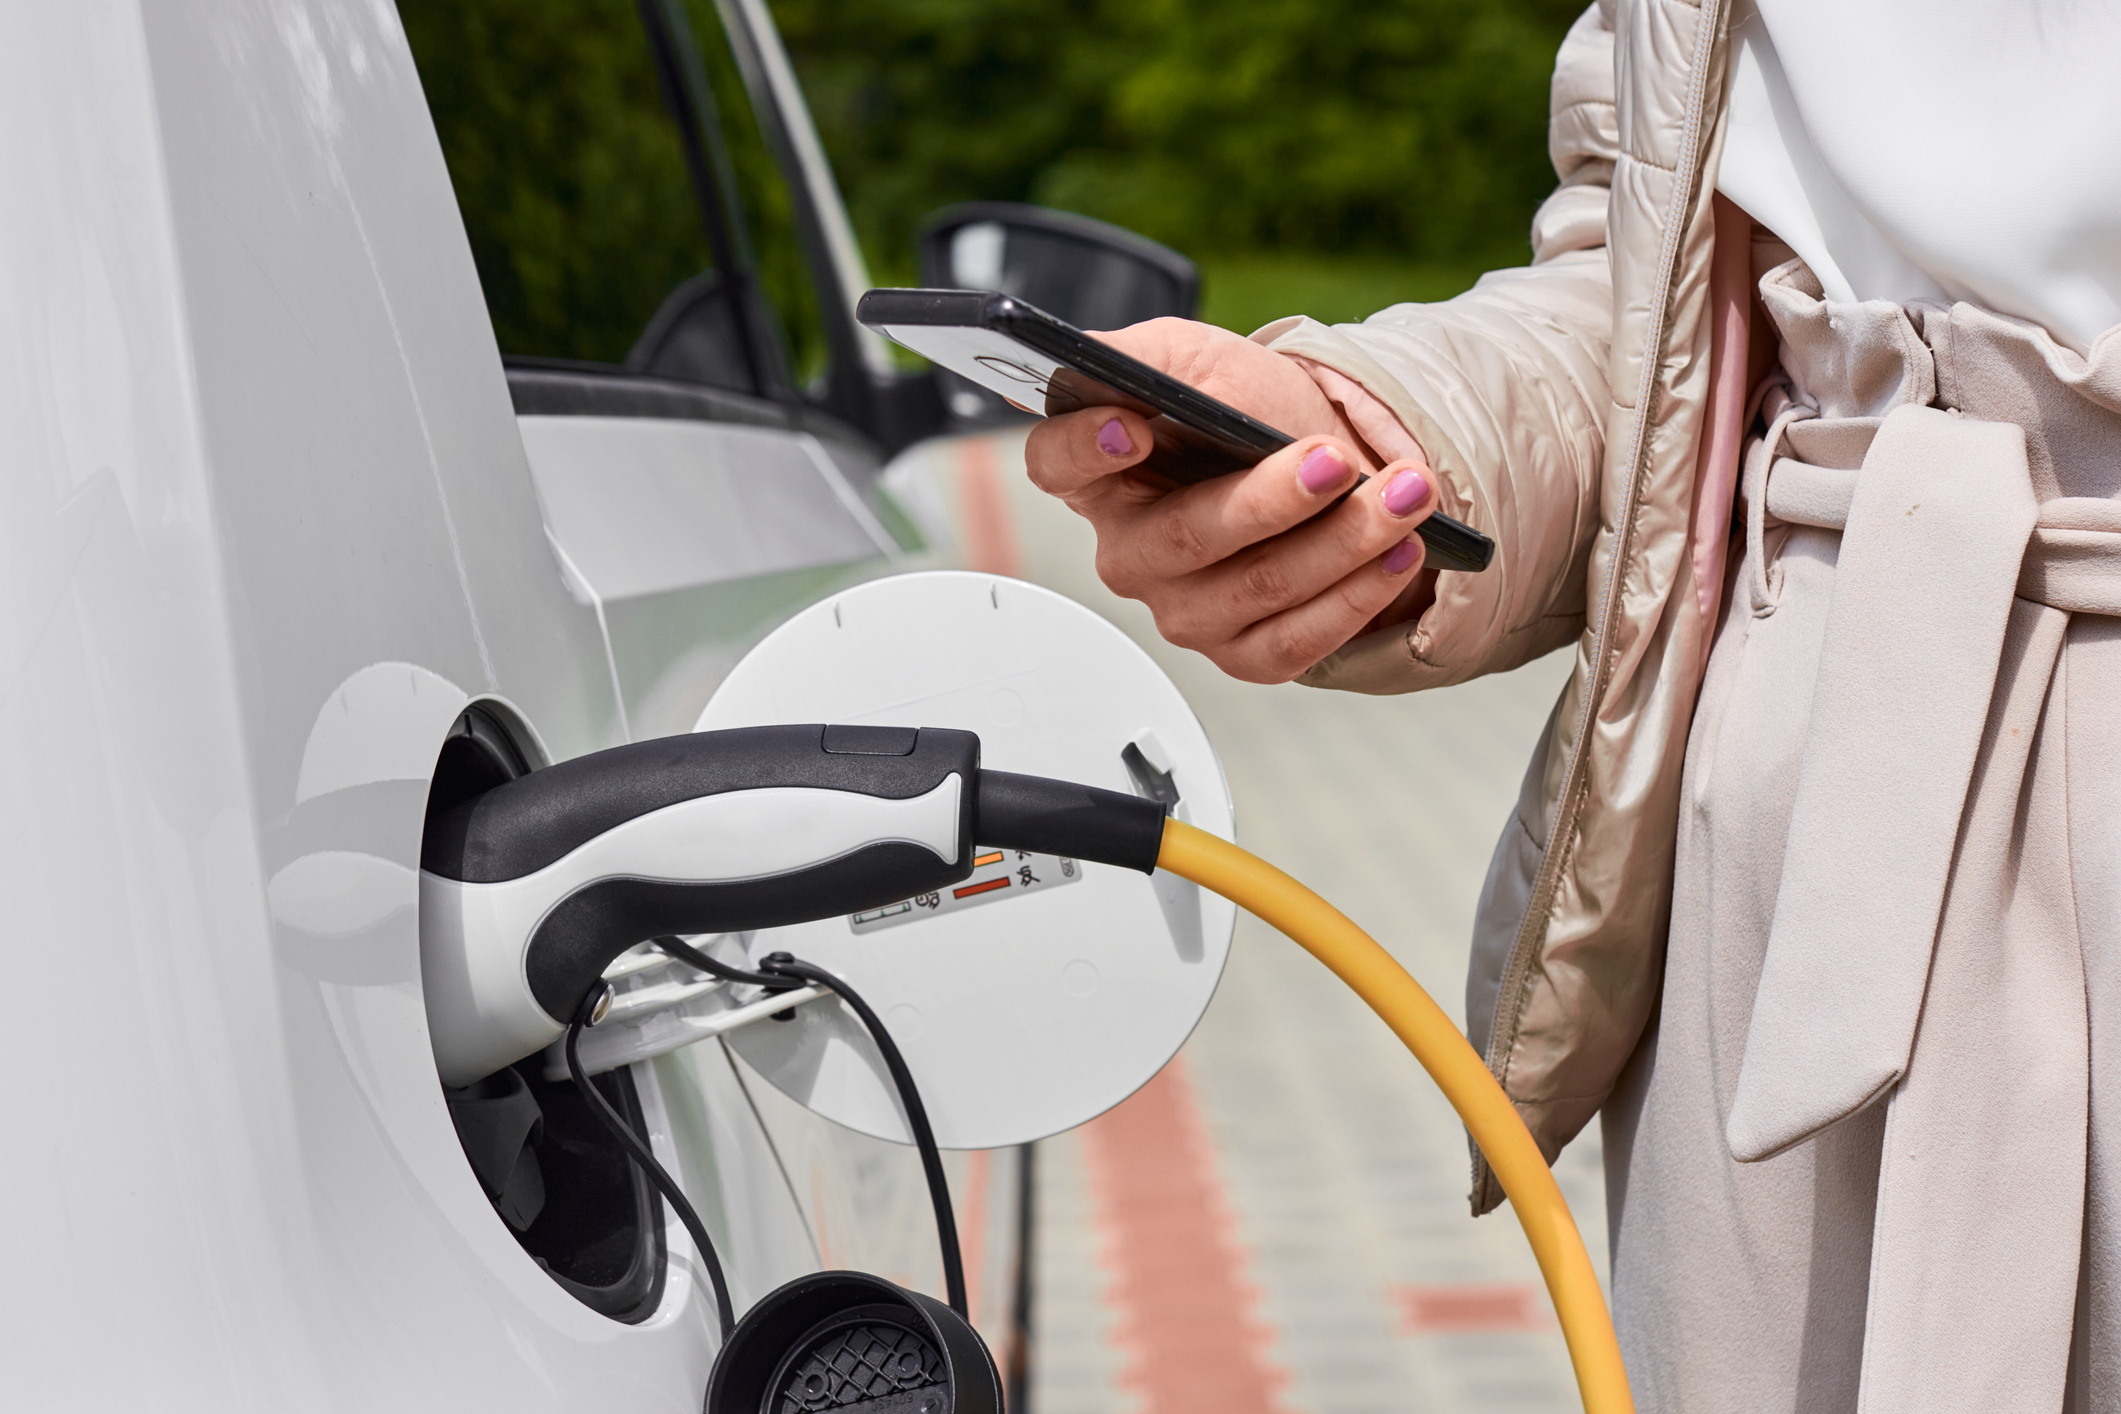 With a goal of achieving carbon neutrality by 2045, Europe's largest economy currently has approximately 90,000 public charging points. However, it aims to substantially increase this number to one million by 2030 to promote the growth of electromobility.